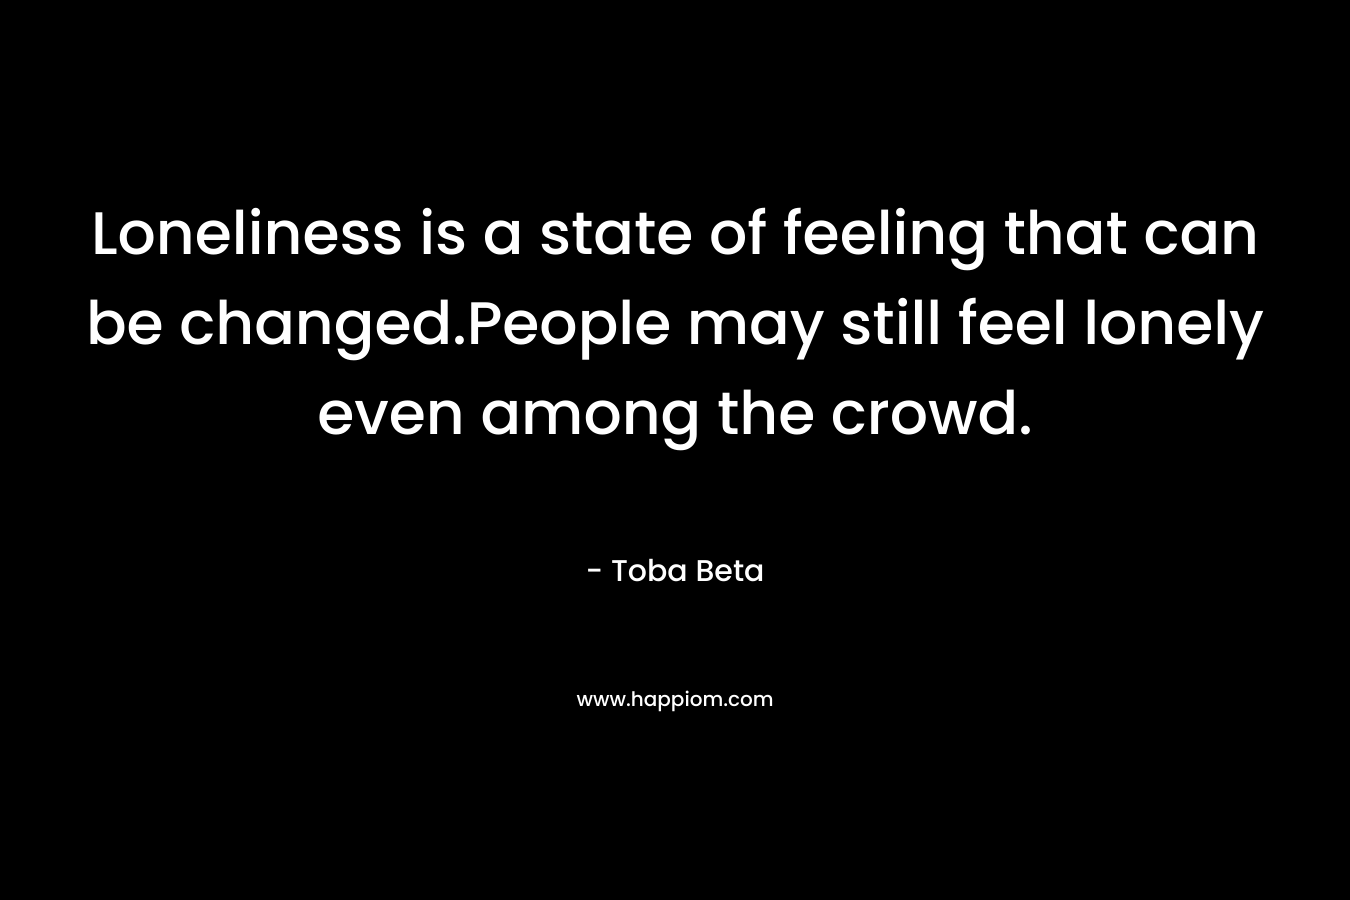 Loneliness is a state of feeling that can be changed.People may still feel lonely even among the crowd.